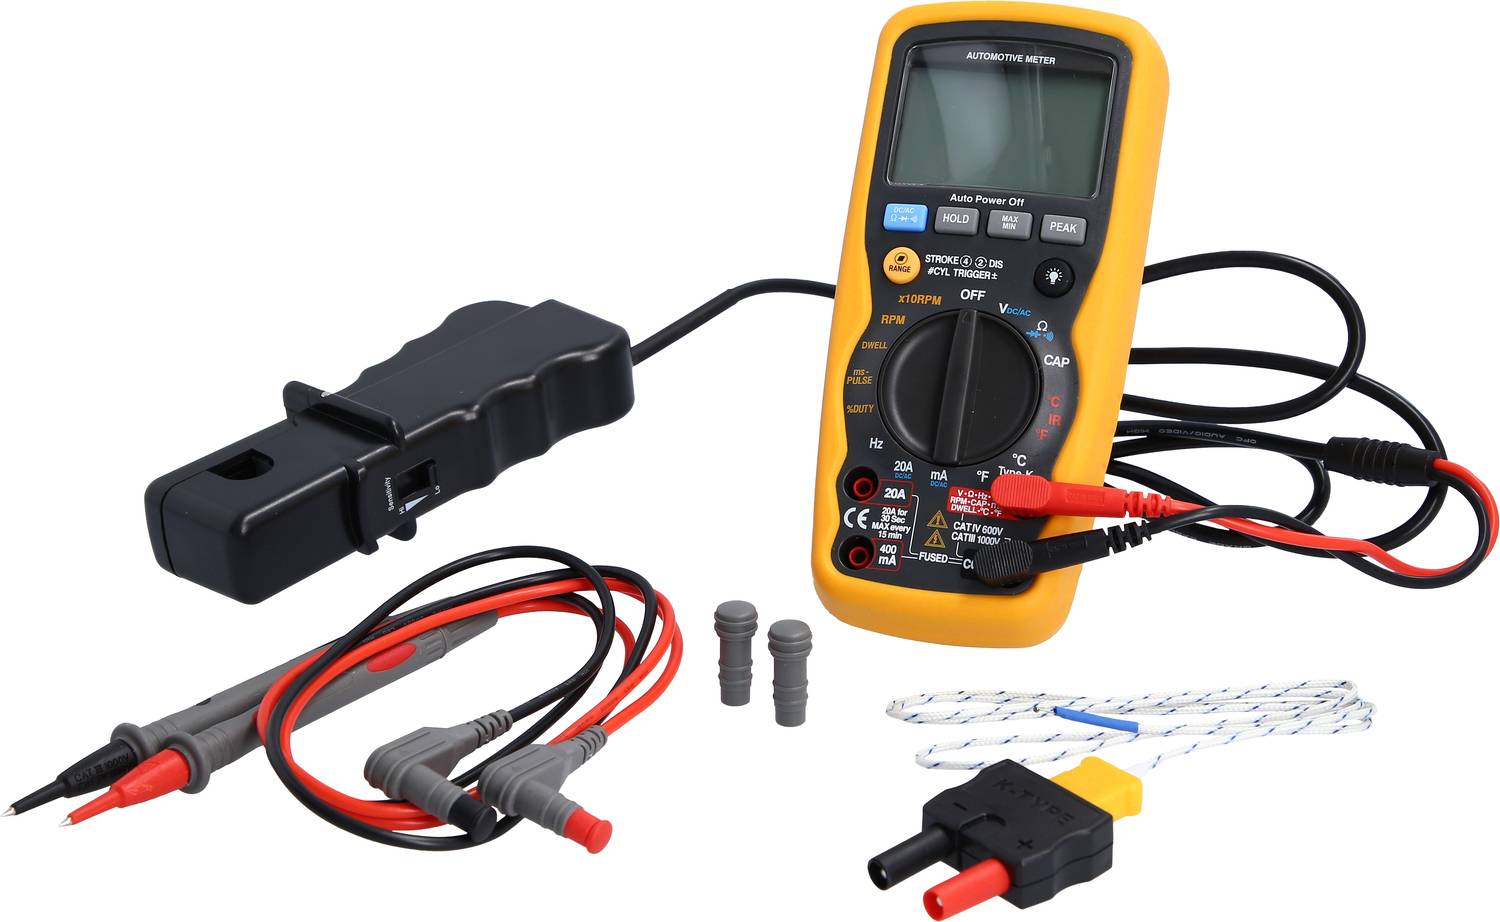 Benning MM 12 Handheld multimeter Calibrated to (ISO standards